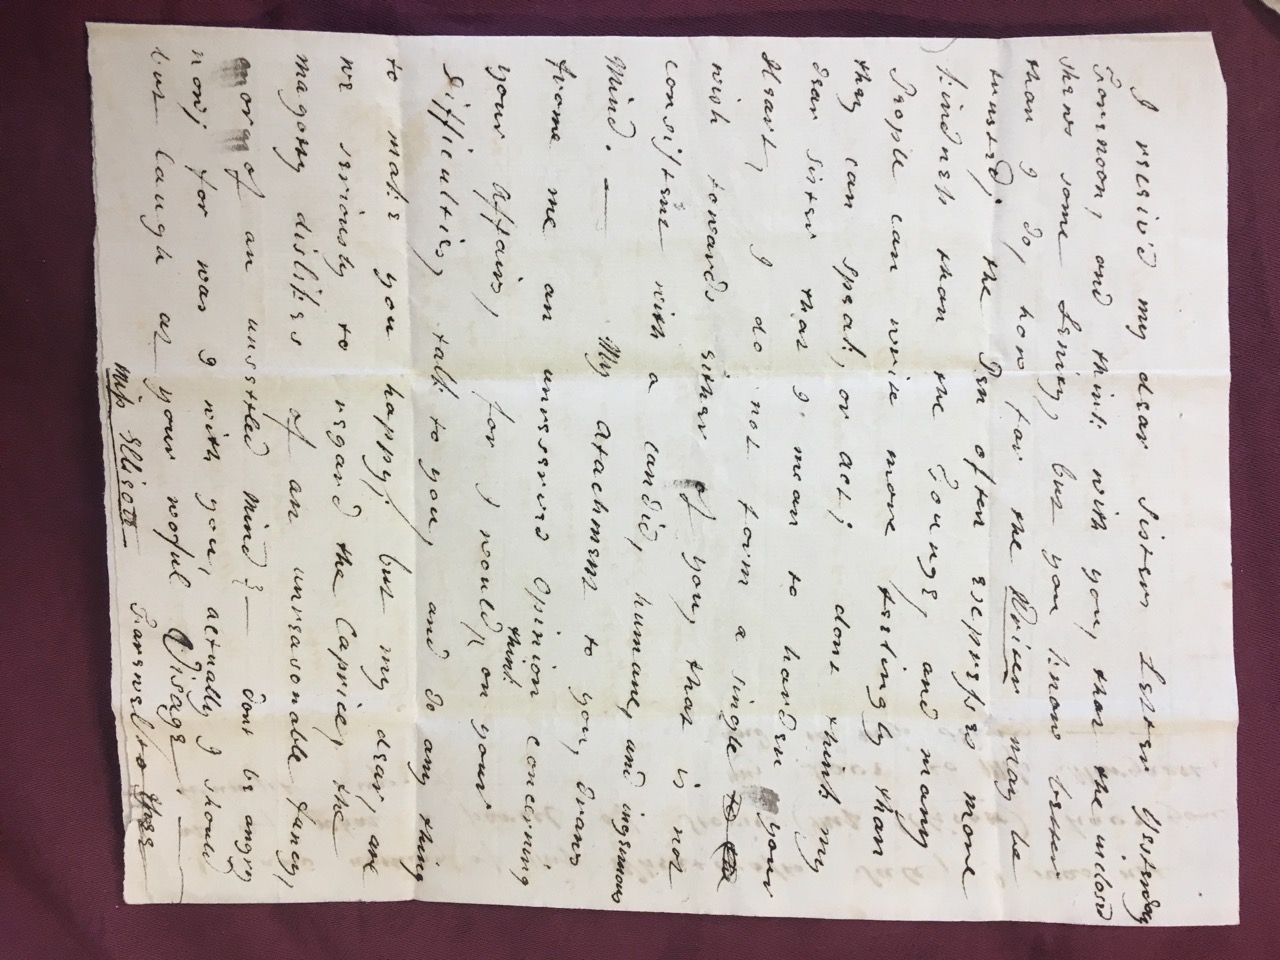 Image #1 of letter: Elizabeth Hare to Ann Hare, undated